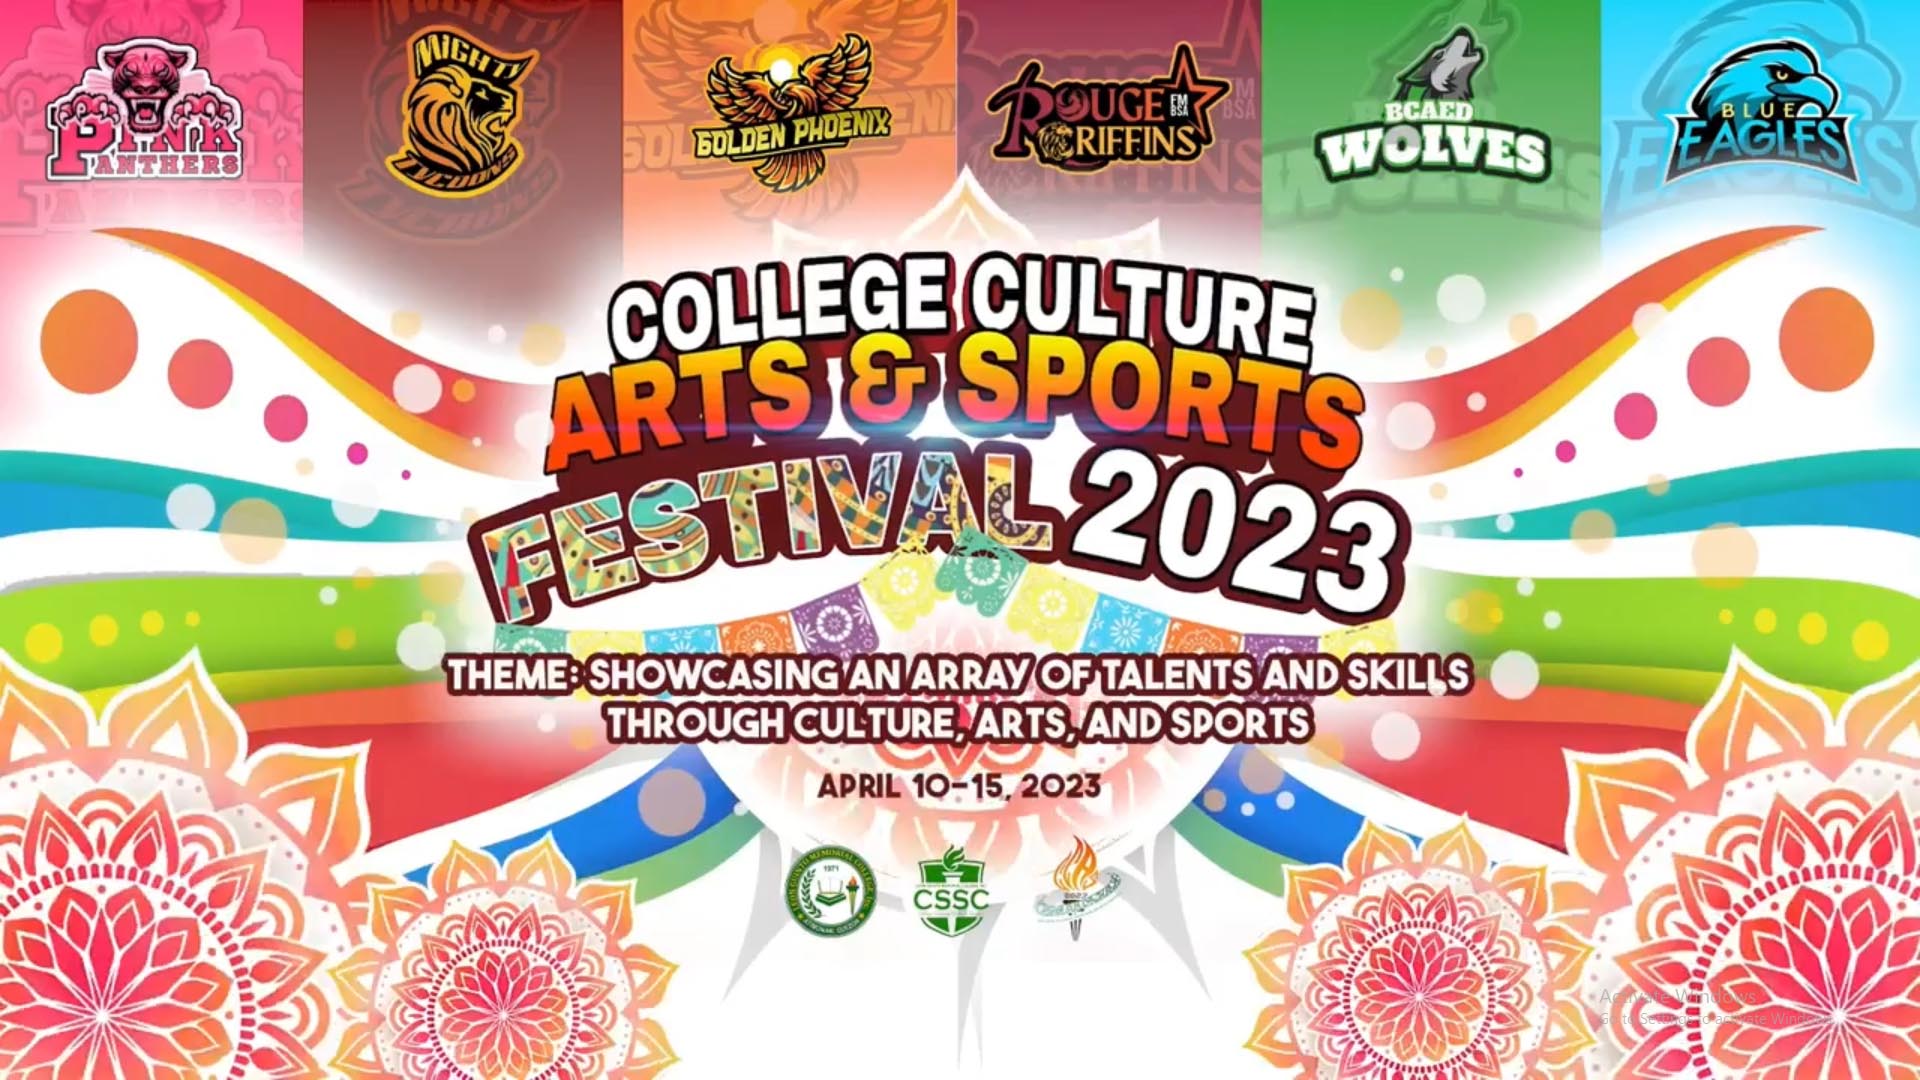 College Culture Arts & Sports Festival 2023 Agimat Sining at